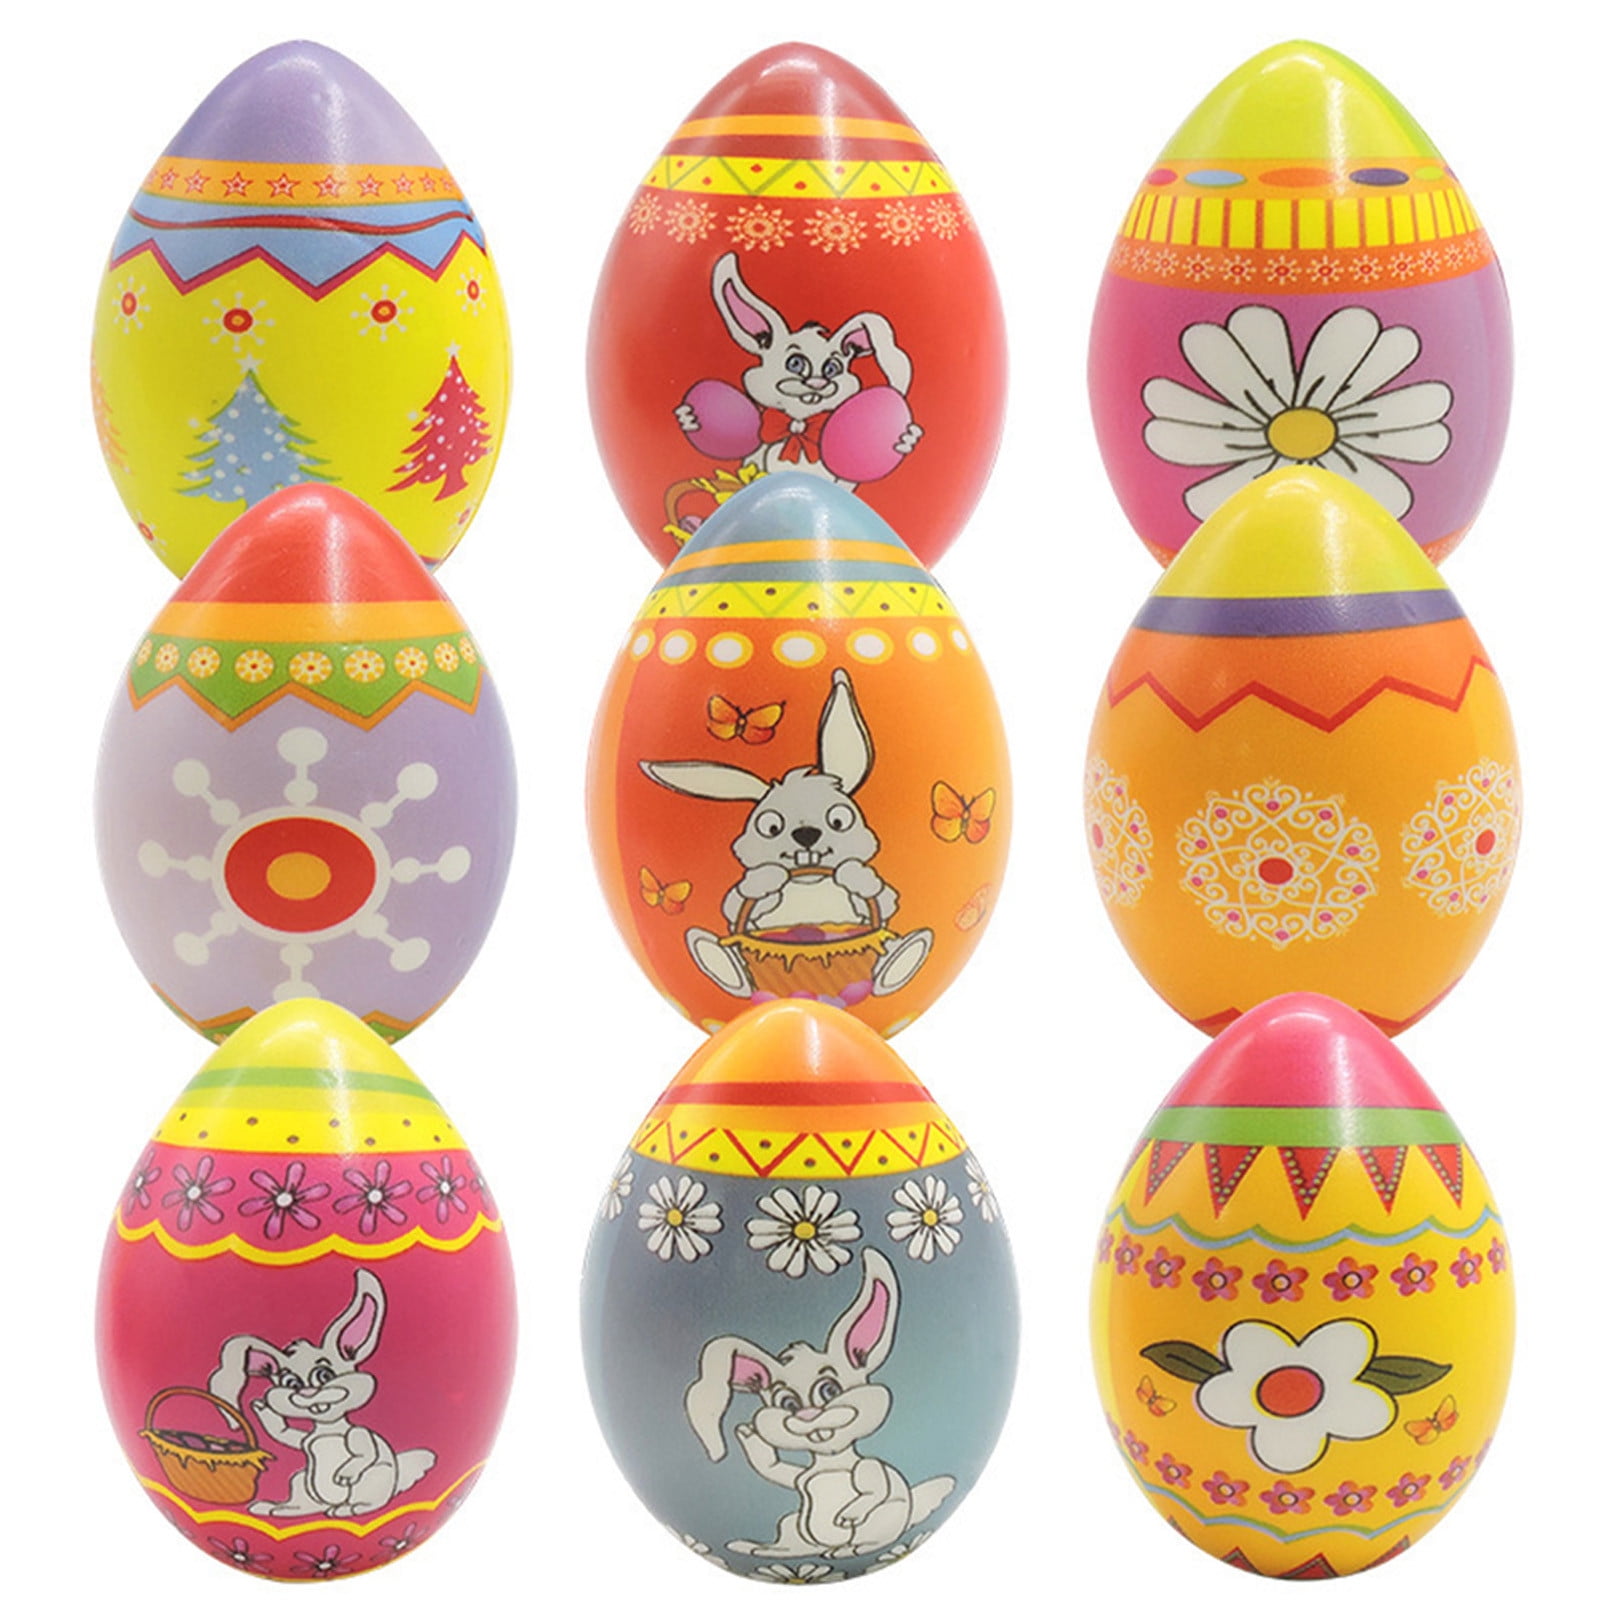 Style 3 2.5 inches Multicolored Athoinsu 24 PCS Easter Eggs Set Colorful Expression Painted Fillable Eggs Party Favors Spring Home Yard Decor Gifts